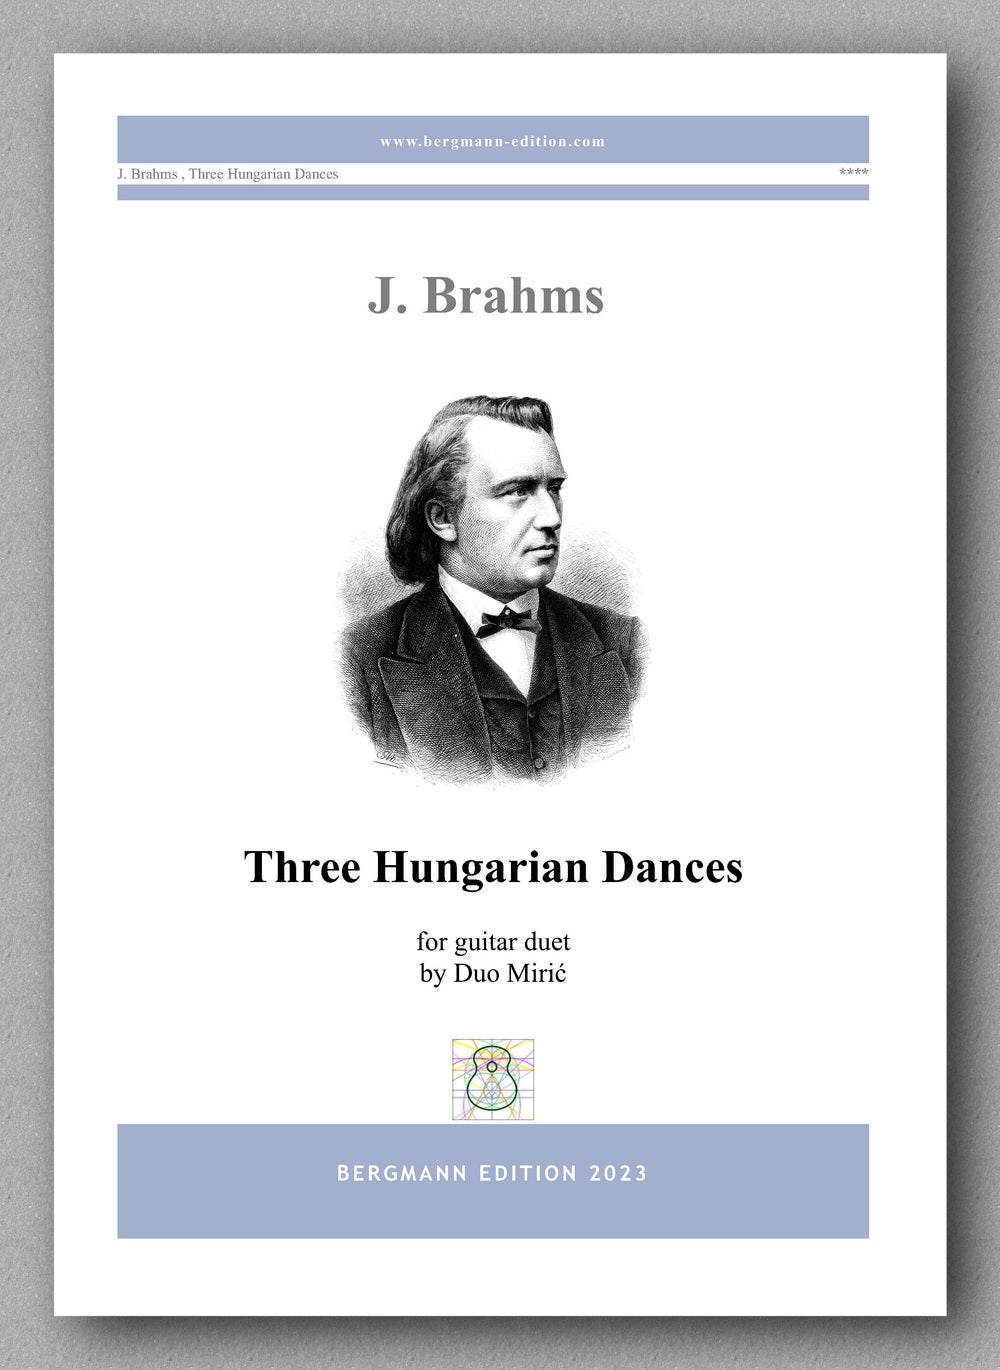 J. Brahms, Three Hungarian Dances, preview of the cover